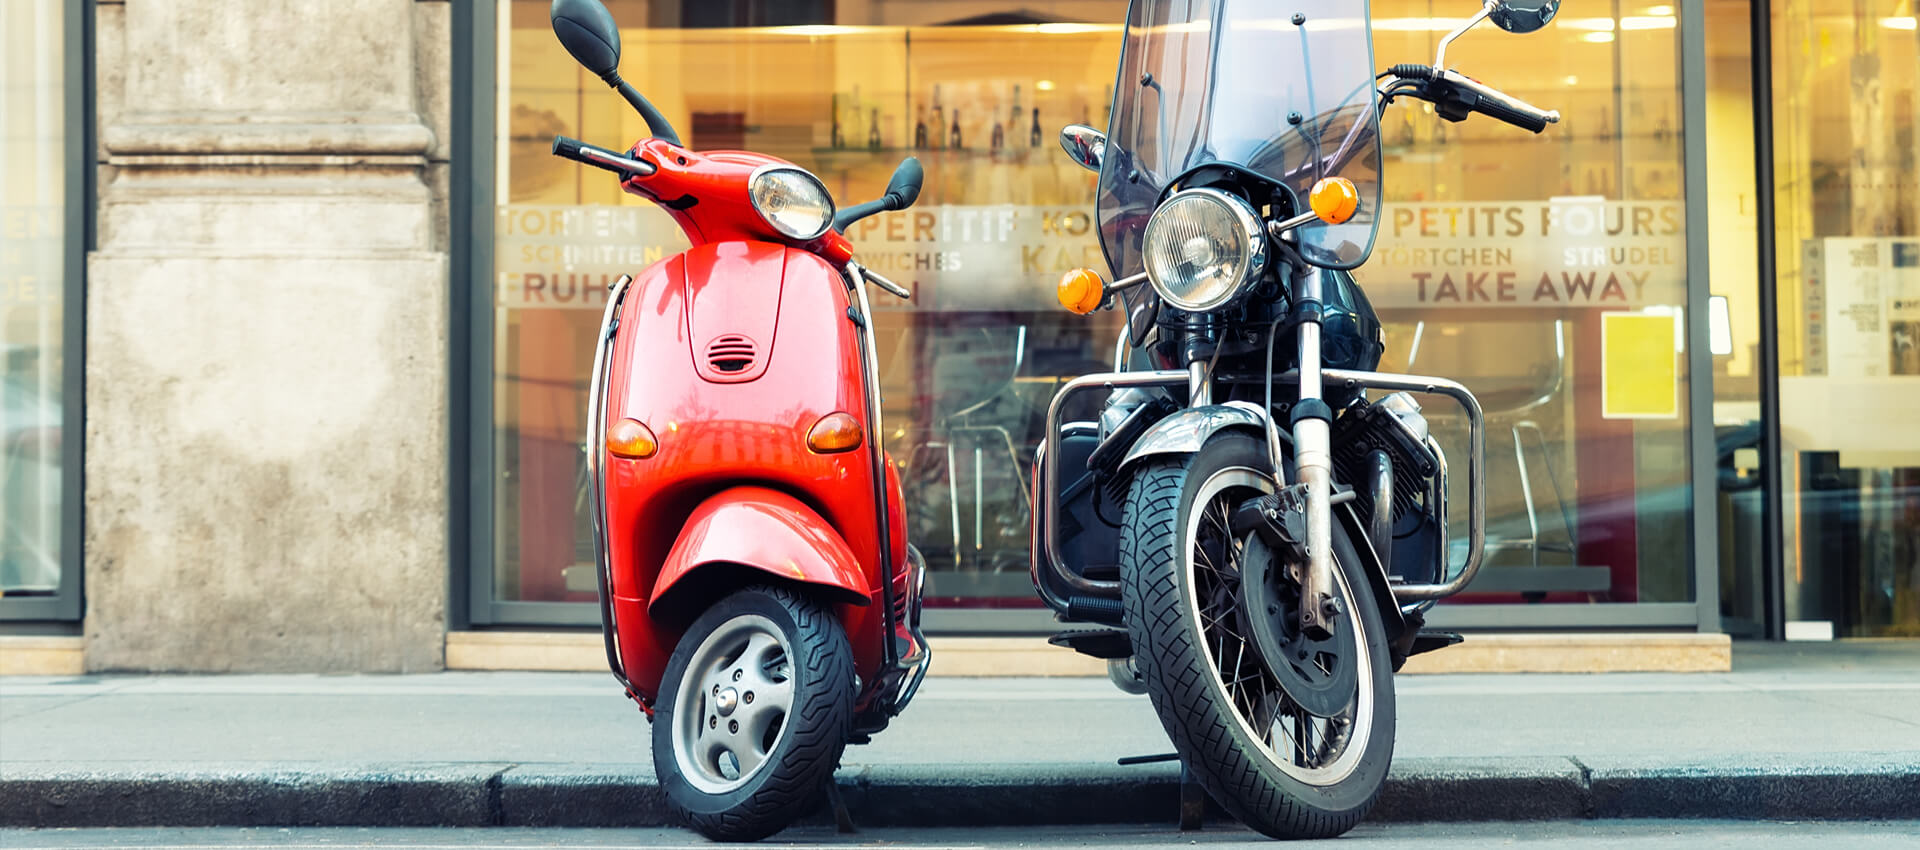 Motorcycle Or Scooter? What Are The Differences? - Driving Test